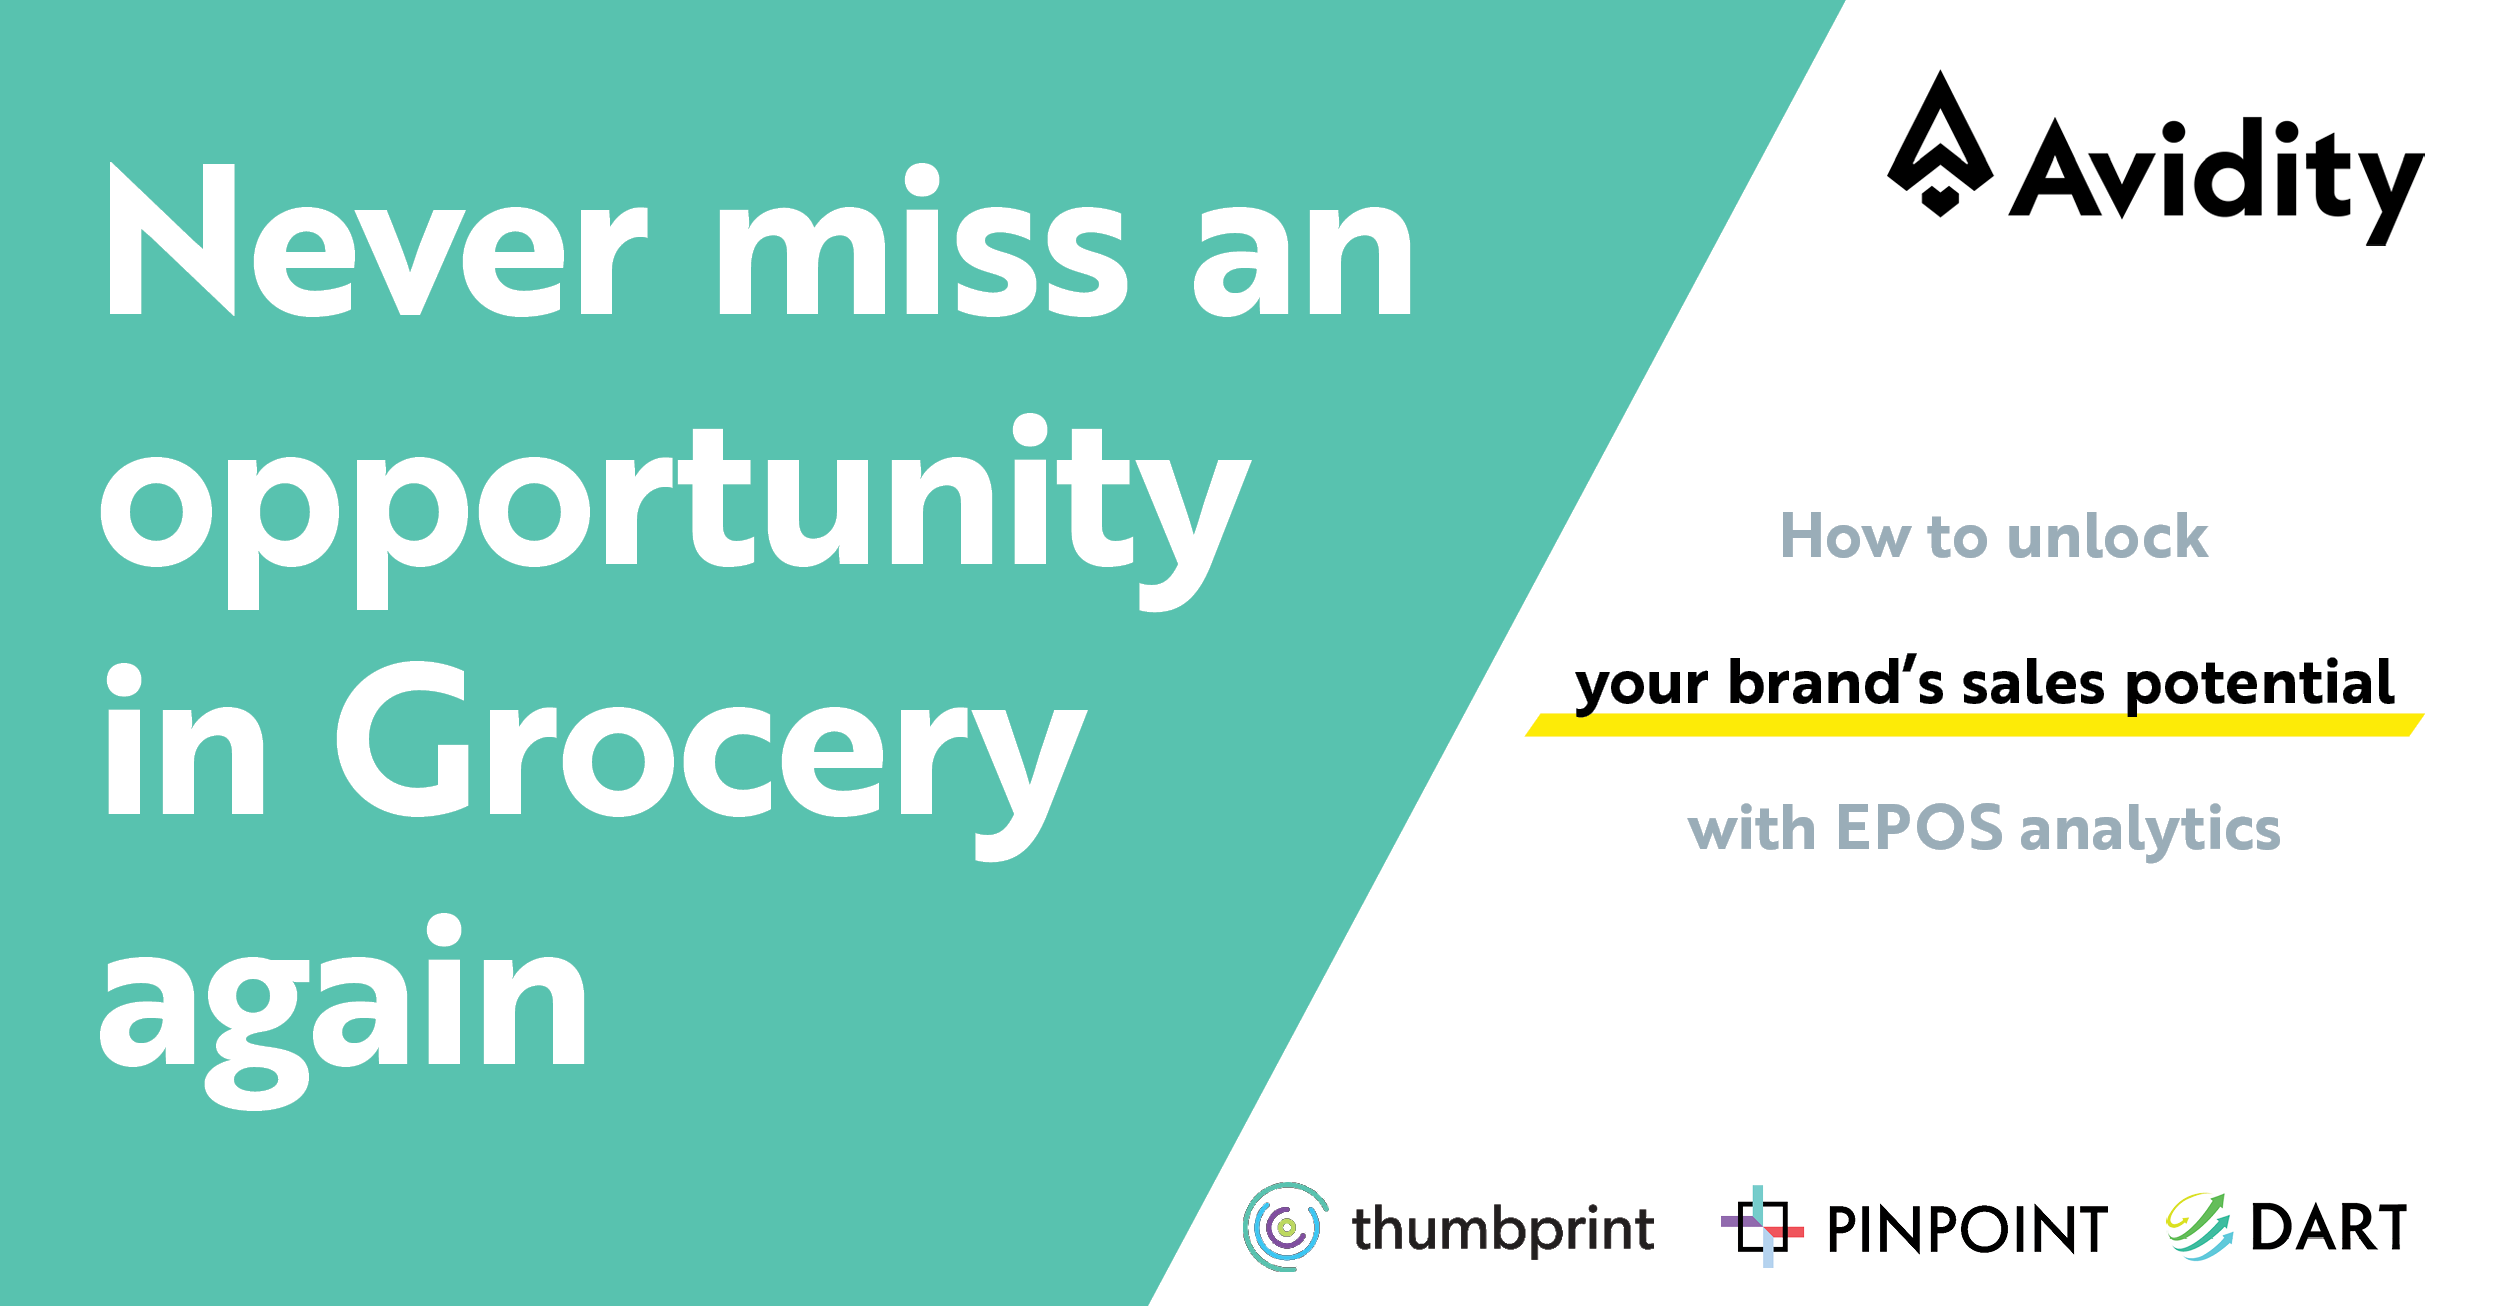 Never miss an opportunity in Grocery again: How to unlock your brand’s sales potential with EPOS analytics